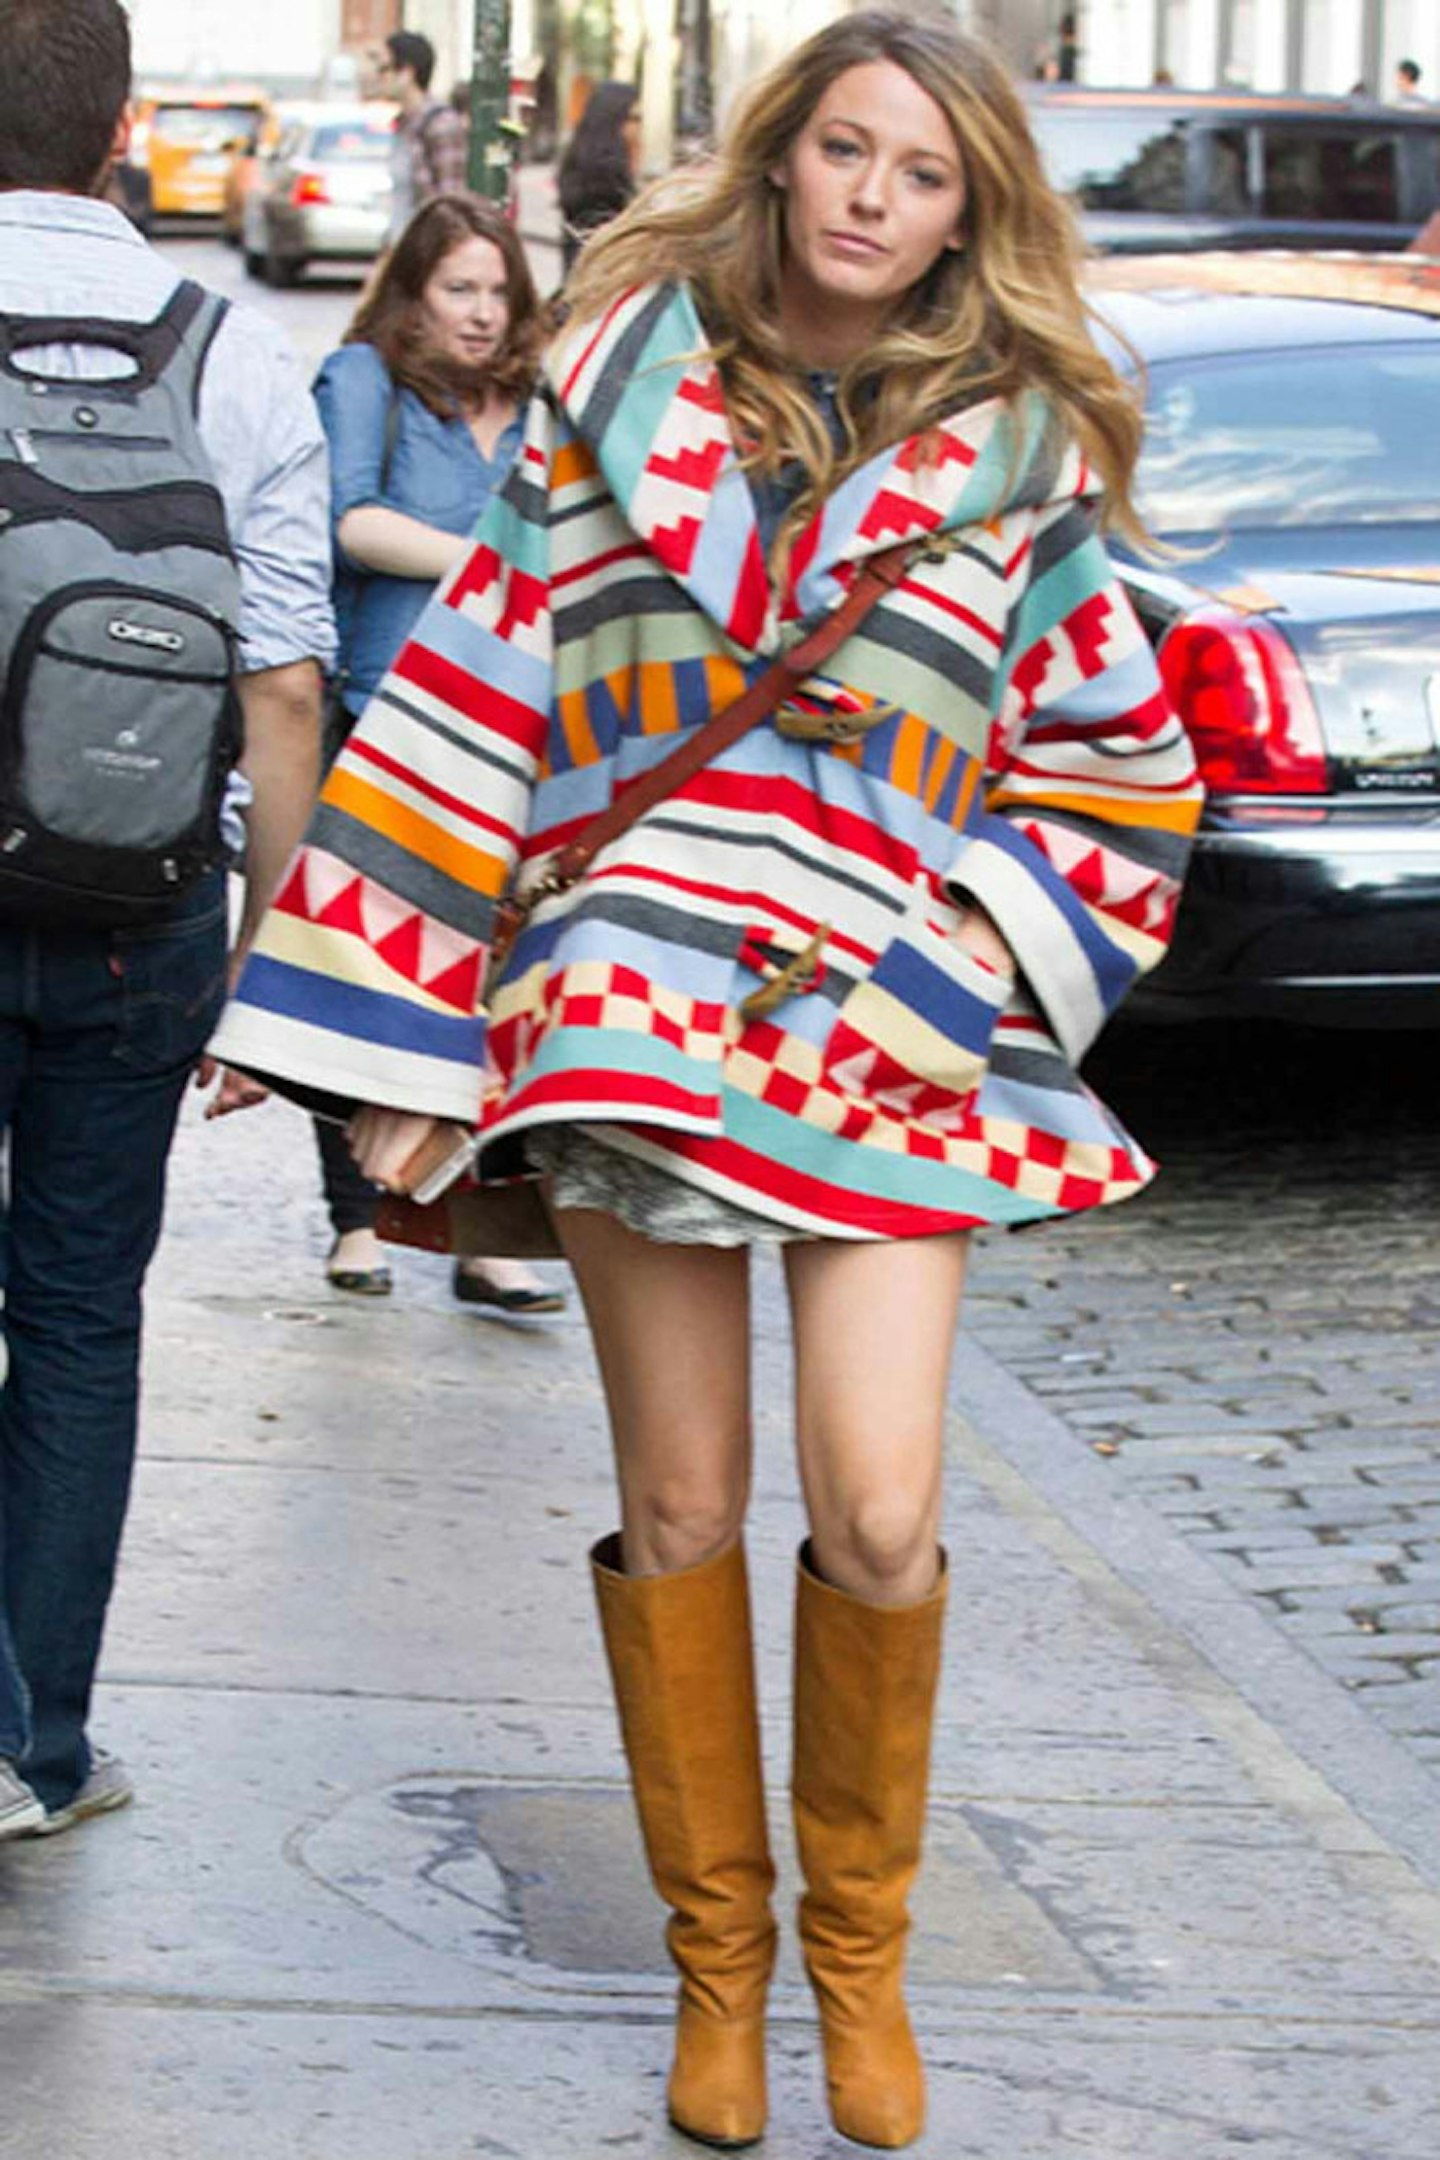 Blake Lively style 2014 new york boots colourful coat